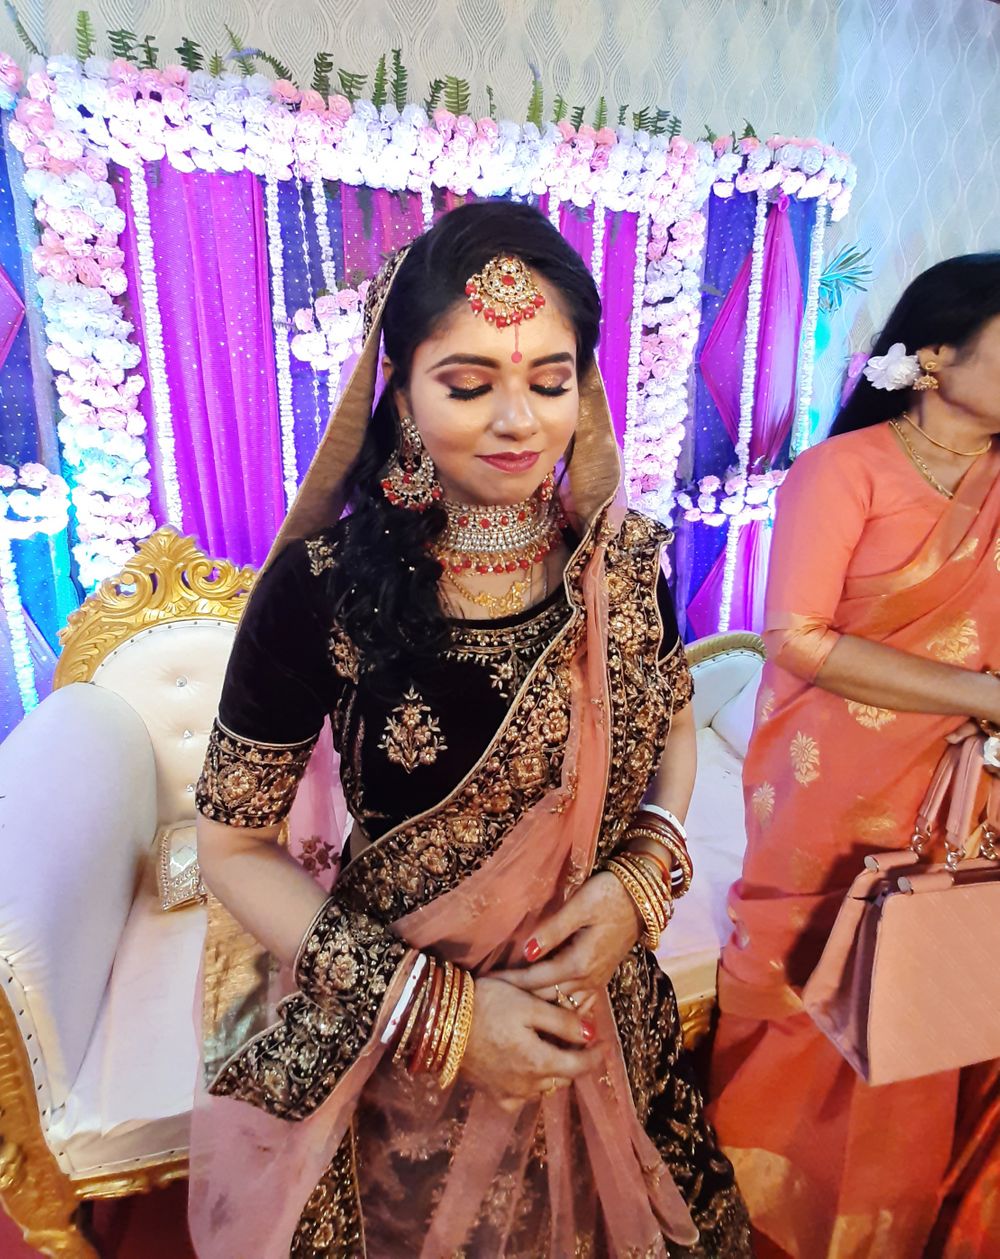 Photo From Bengali Reception Look - By The Makeup Saga